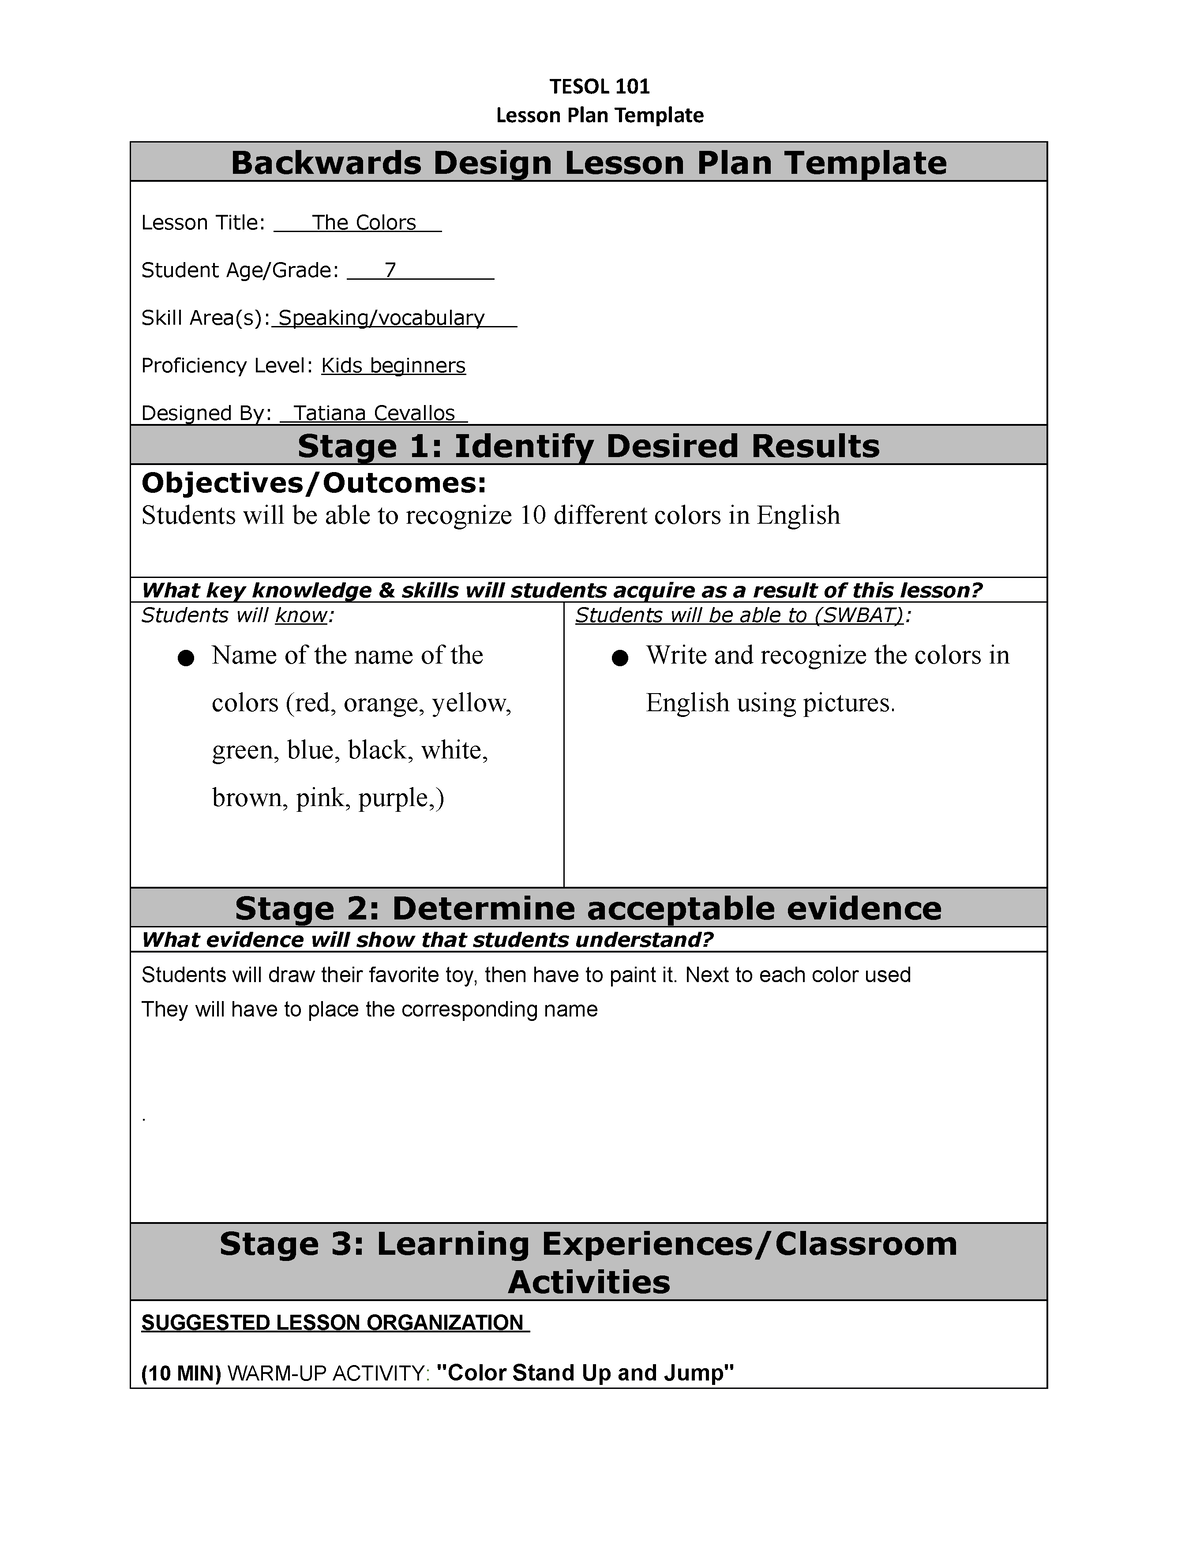 Tesol 101 document lesson Plan Template 2 Colors TESOL 101 Lesson